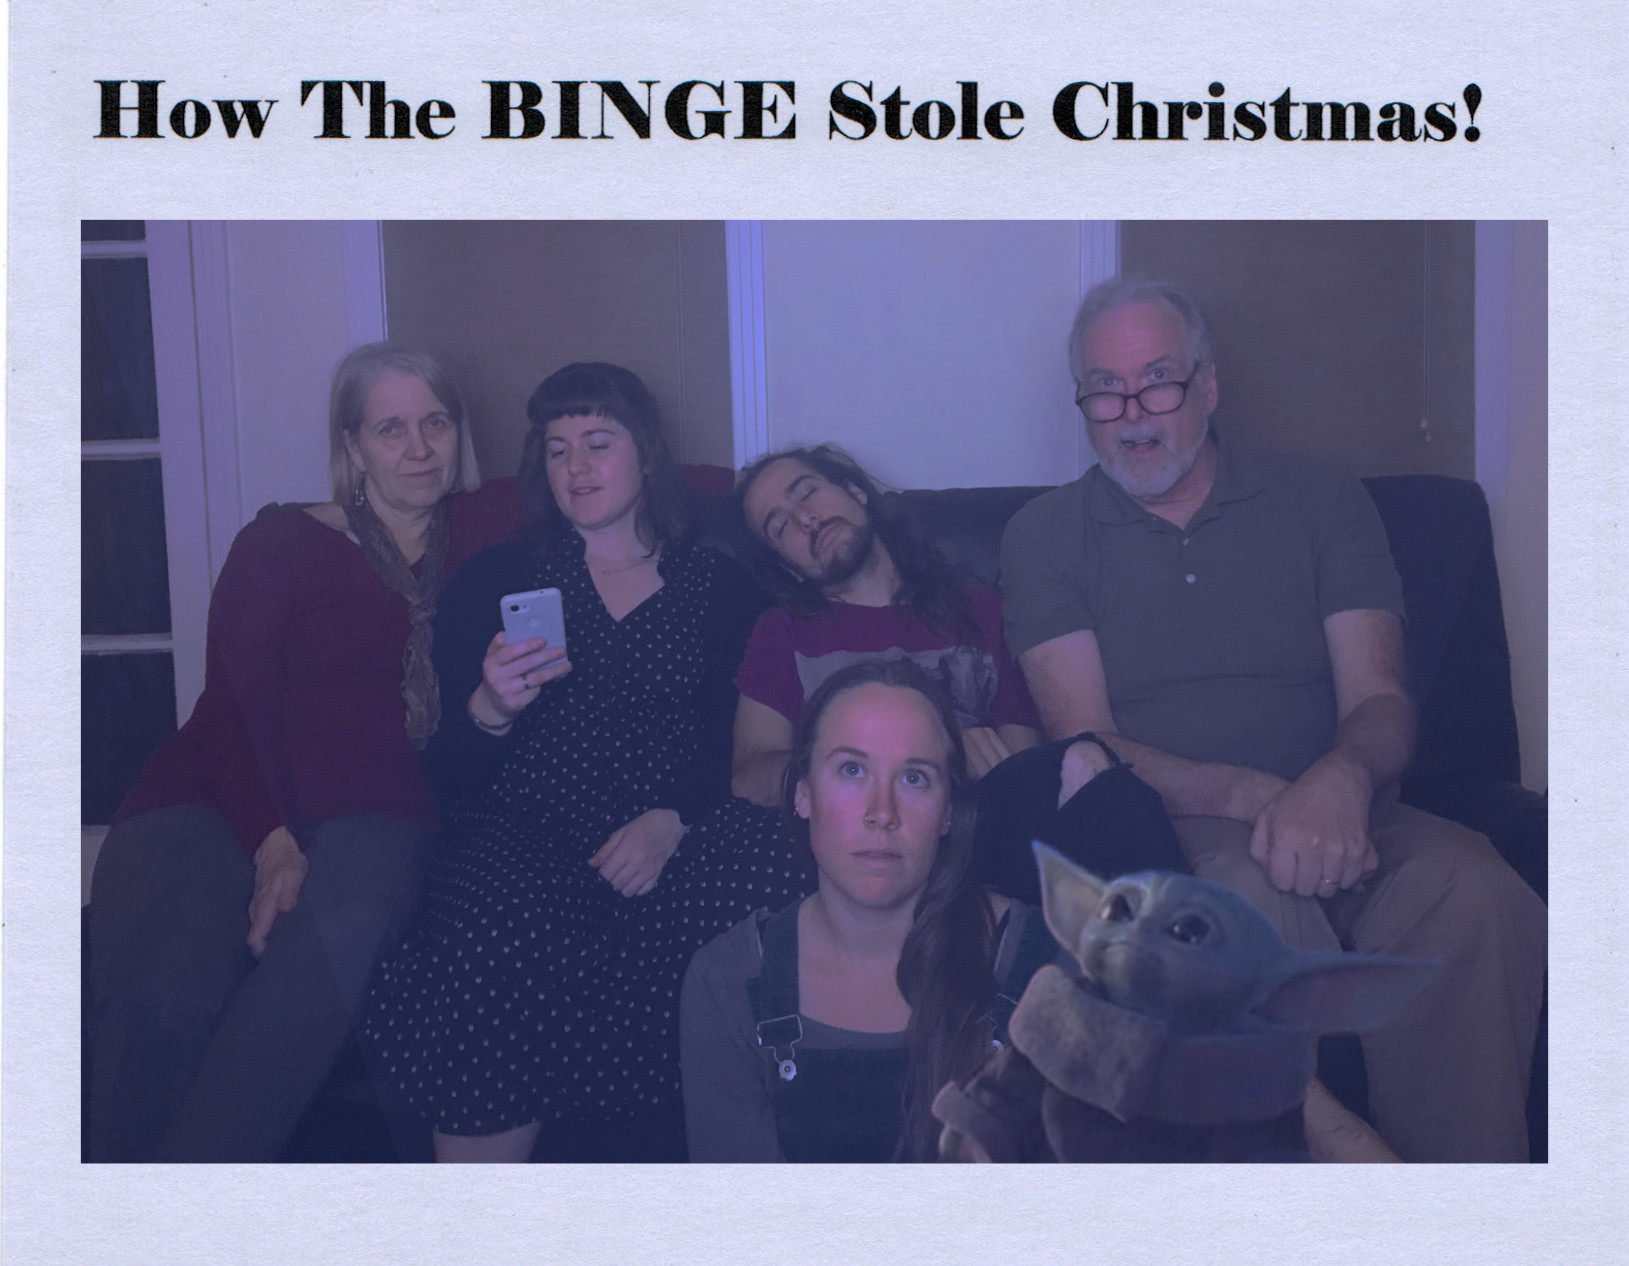 2019 - The Binge That Stole Christmas!